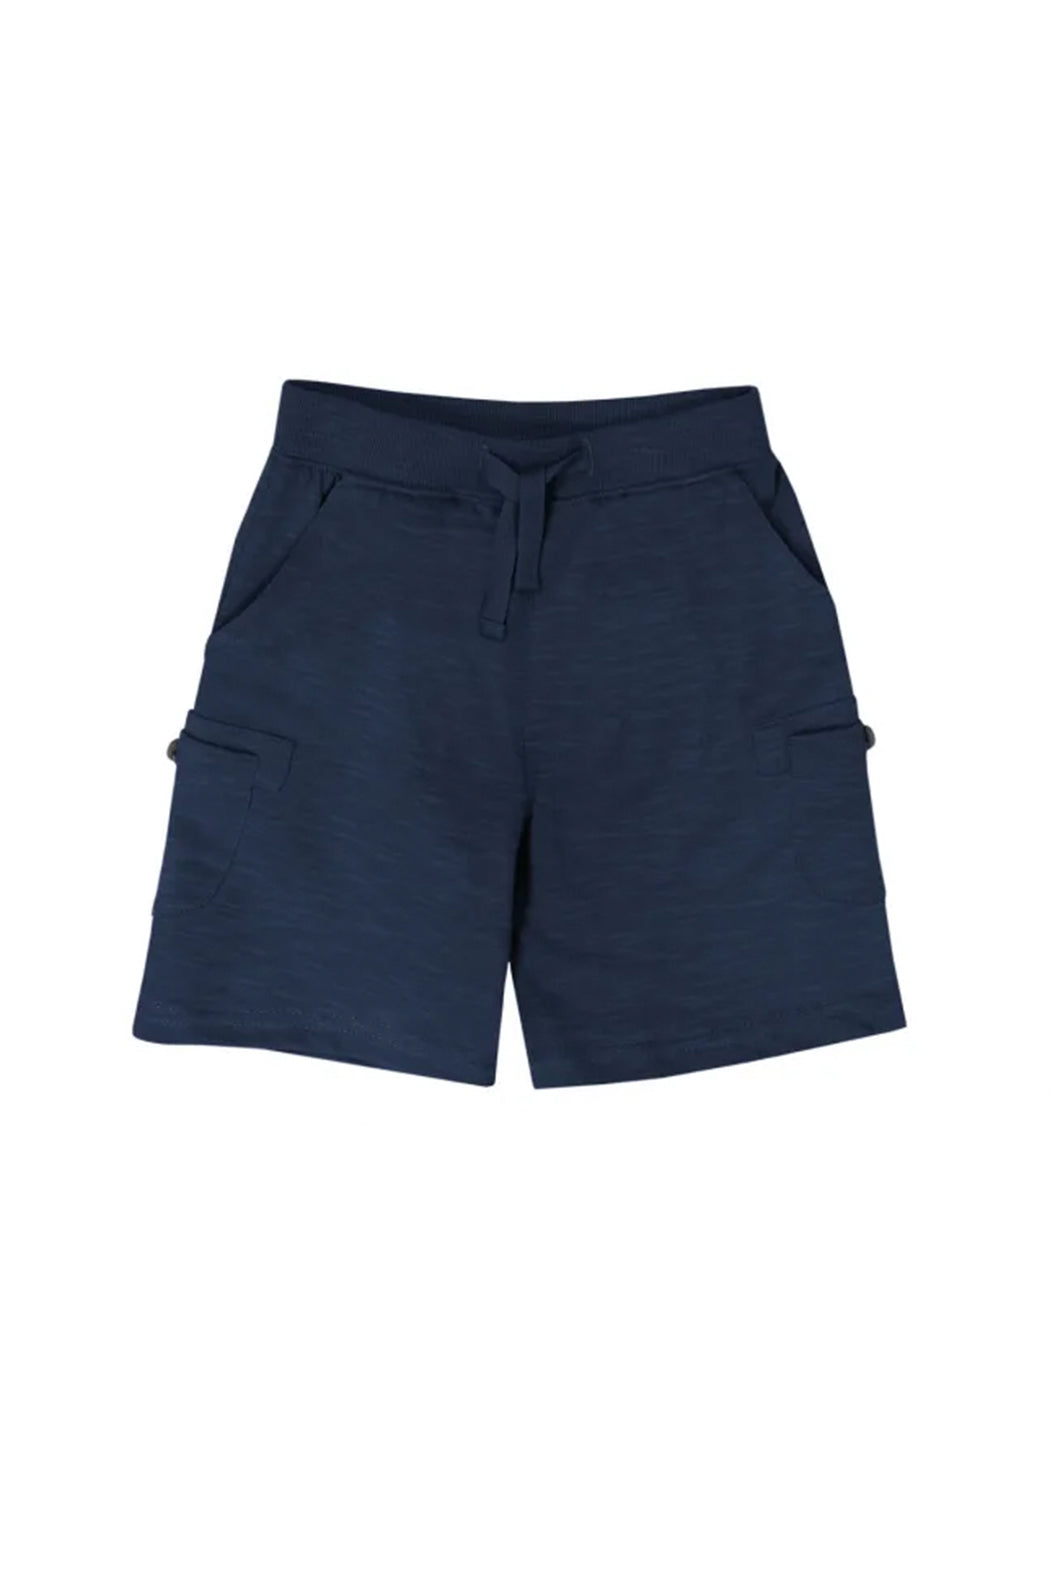 CR Sports Basic Terry Shorts With Pockets - Navy